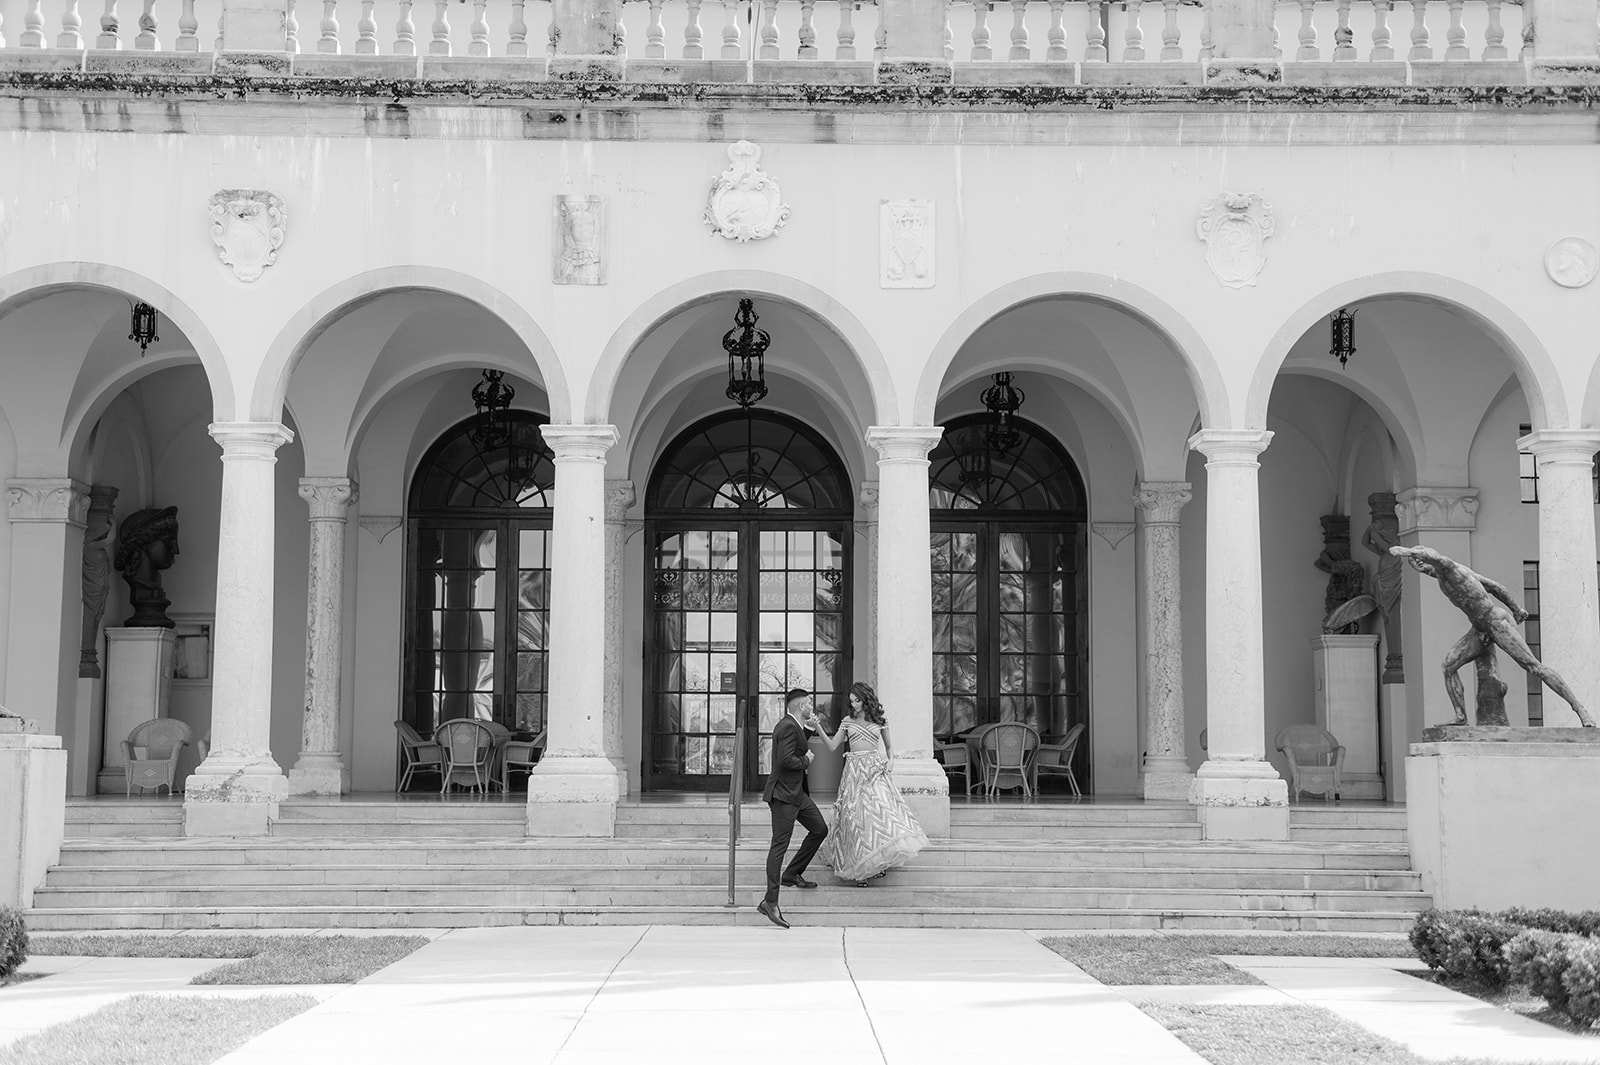 "John and Mable Ringling Museum engagement shoot with Indian couple"
